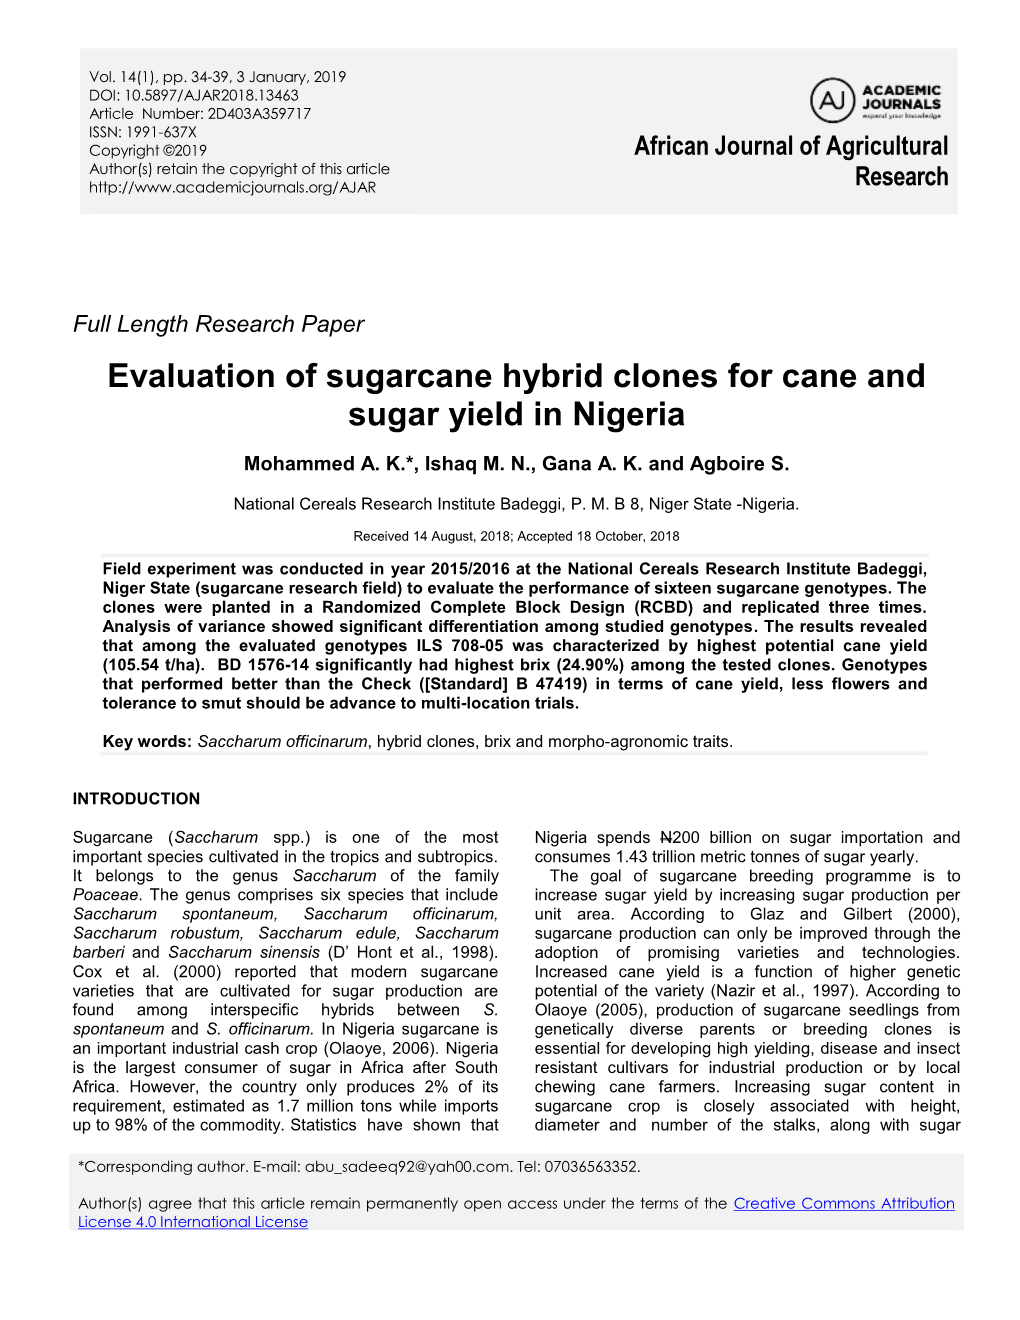 Evaluation of Sugarcane Hybrid Clones for Cane and Sugar Yield in Nigeria